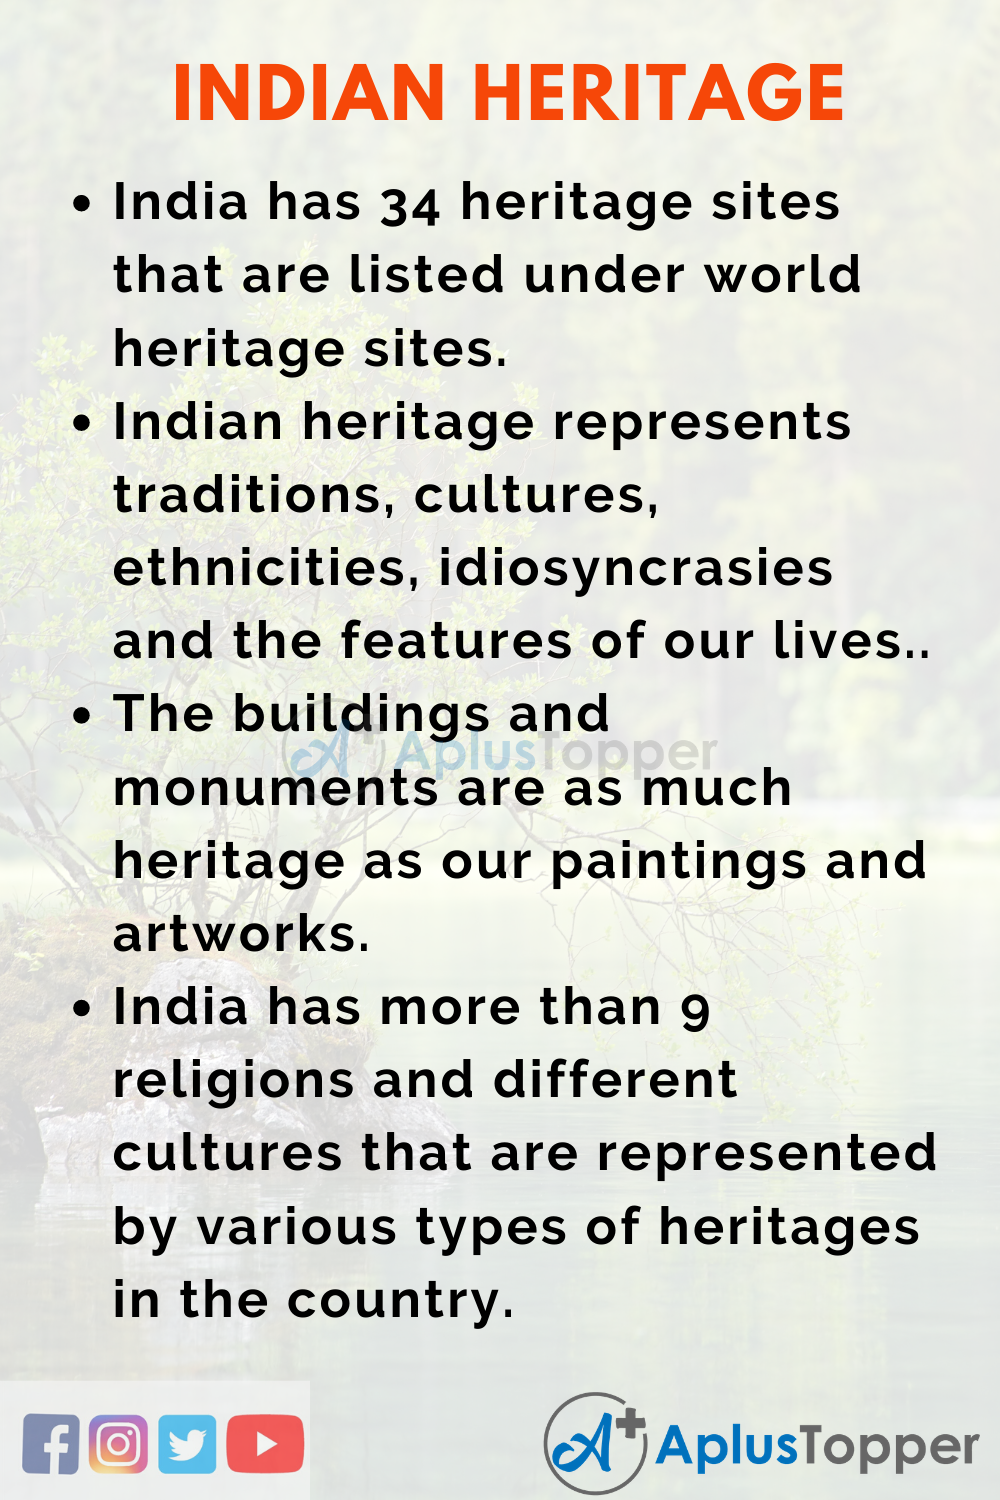 essay on our heritage india